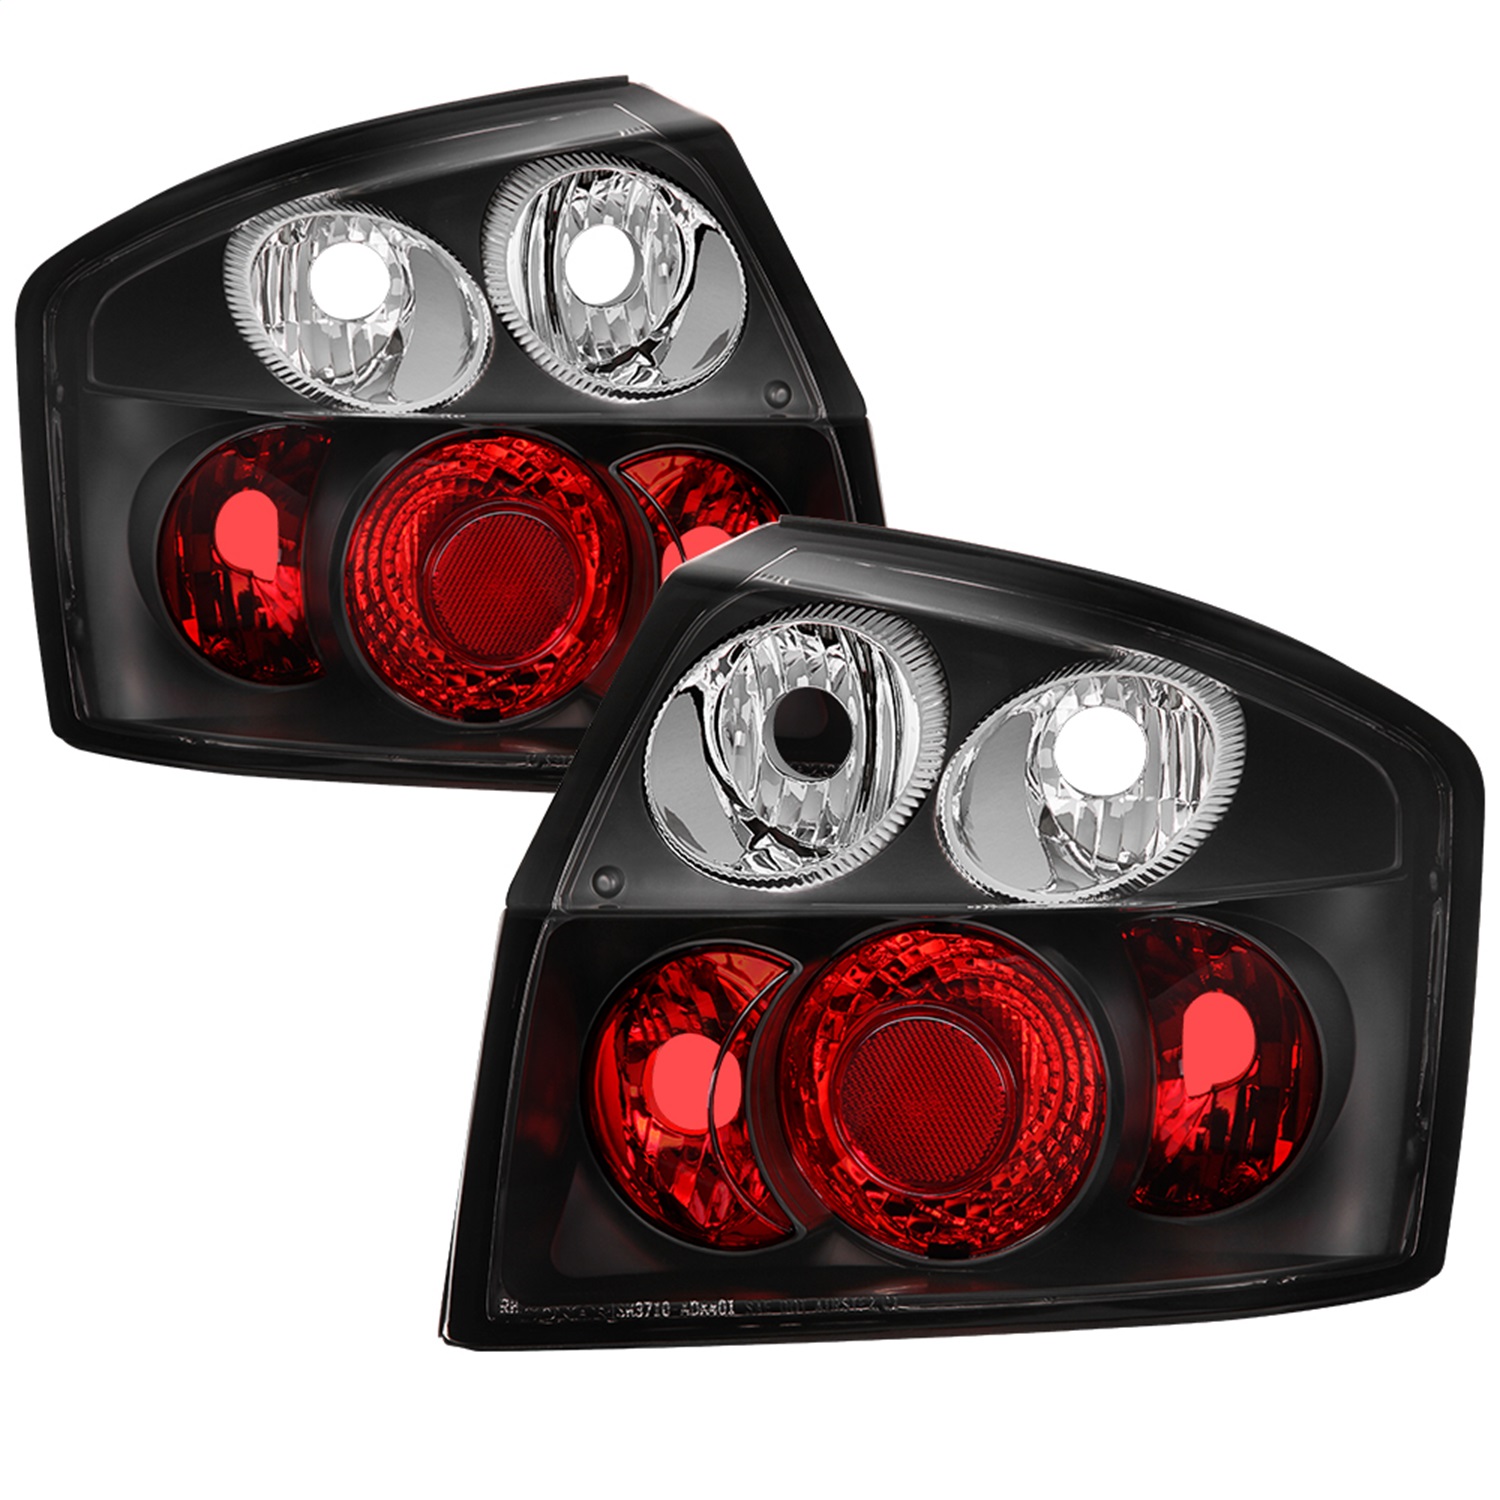 Spyder Auto 5000002 Euro Style Tail Lights Fits 02-05 A4 A4 Quattro